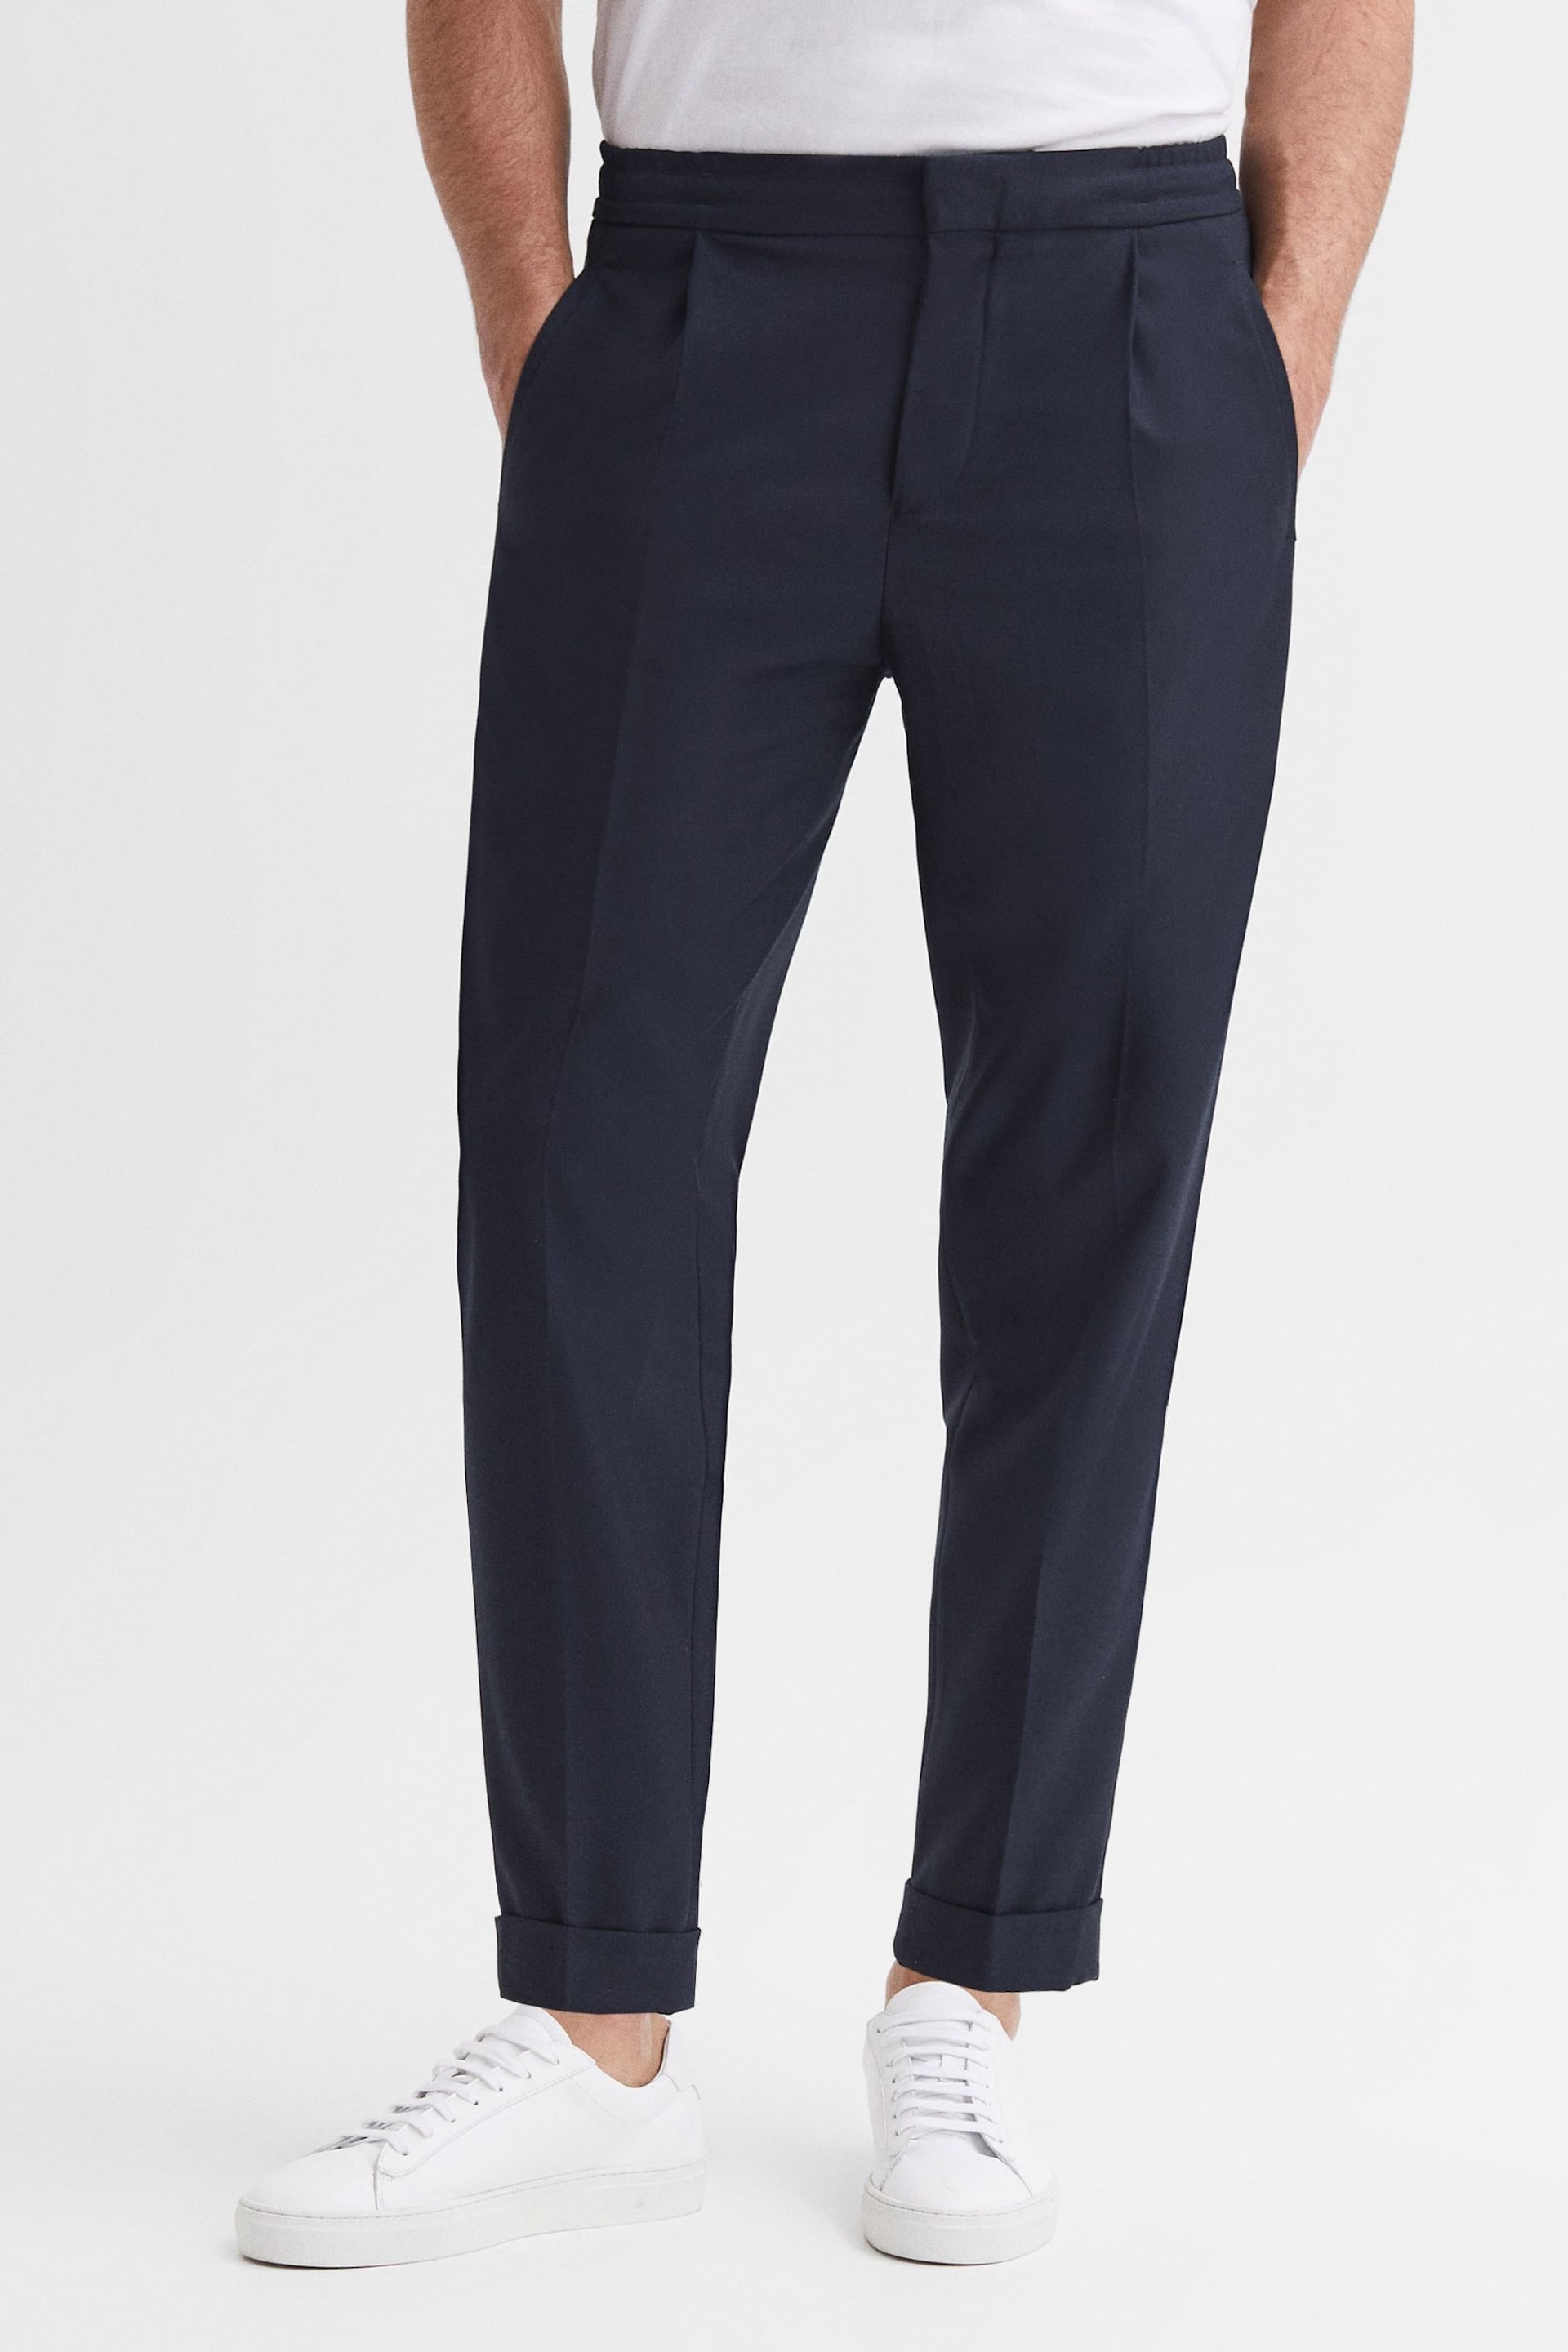 Reiss Navy Brighton Relaxed Drawstring Trousers with Turn-Ups - Image 1 of 5